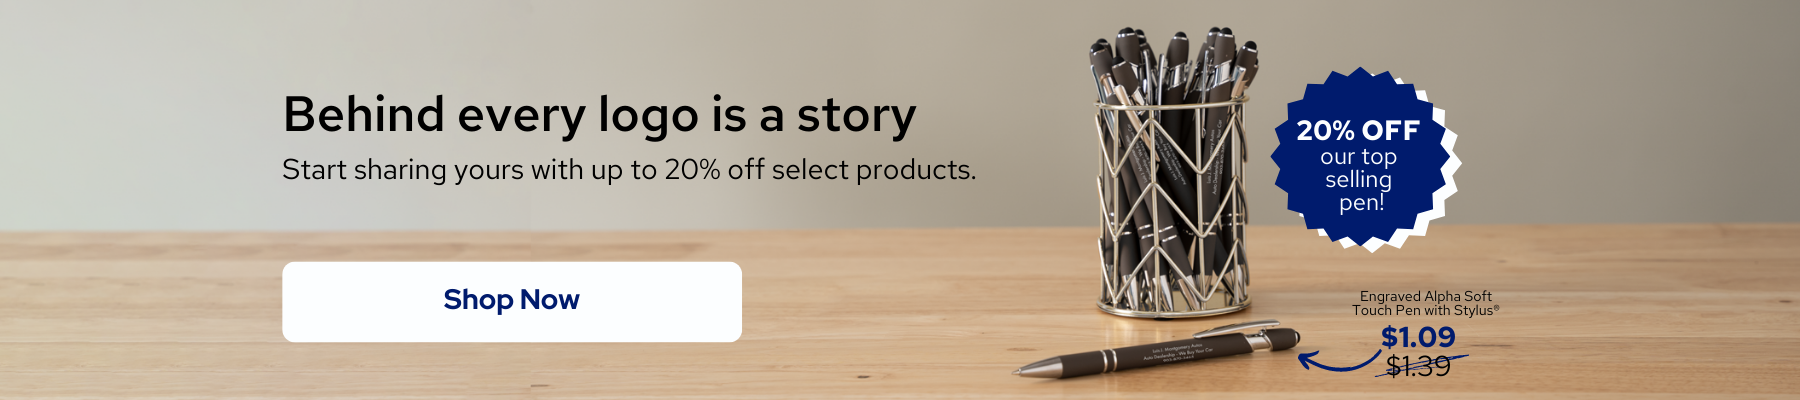 Behind Every Logo is a Story | Start sharing yours with up to 20% Off Select Products | 20% off our top selling pen! | Engraved Alpha Soft Touch Pen with Stylus: Now $1.09; Was $1.39 | Shop Now